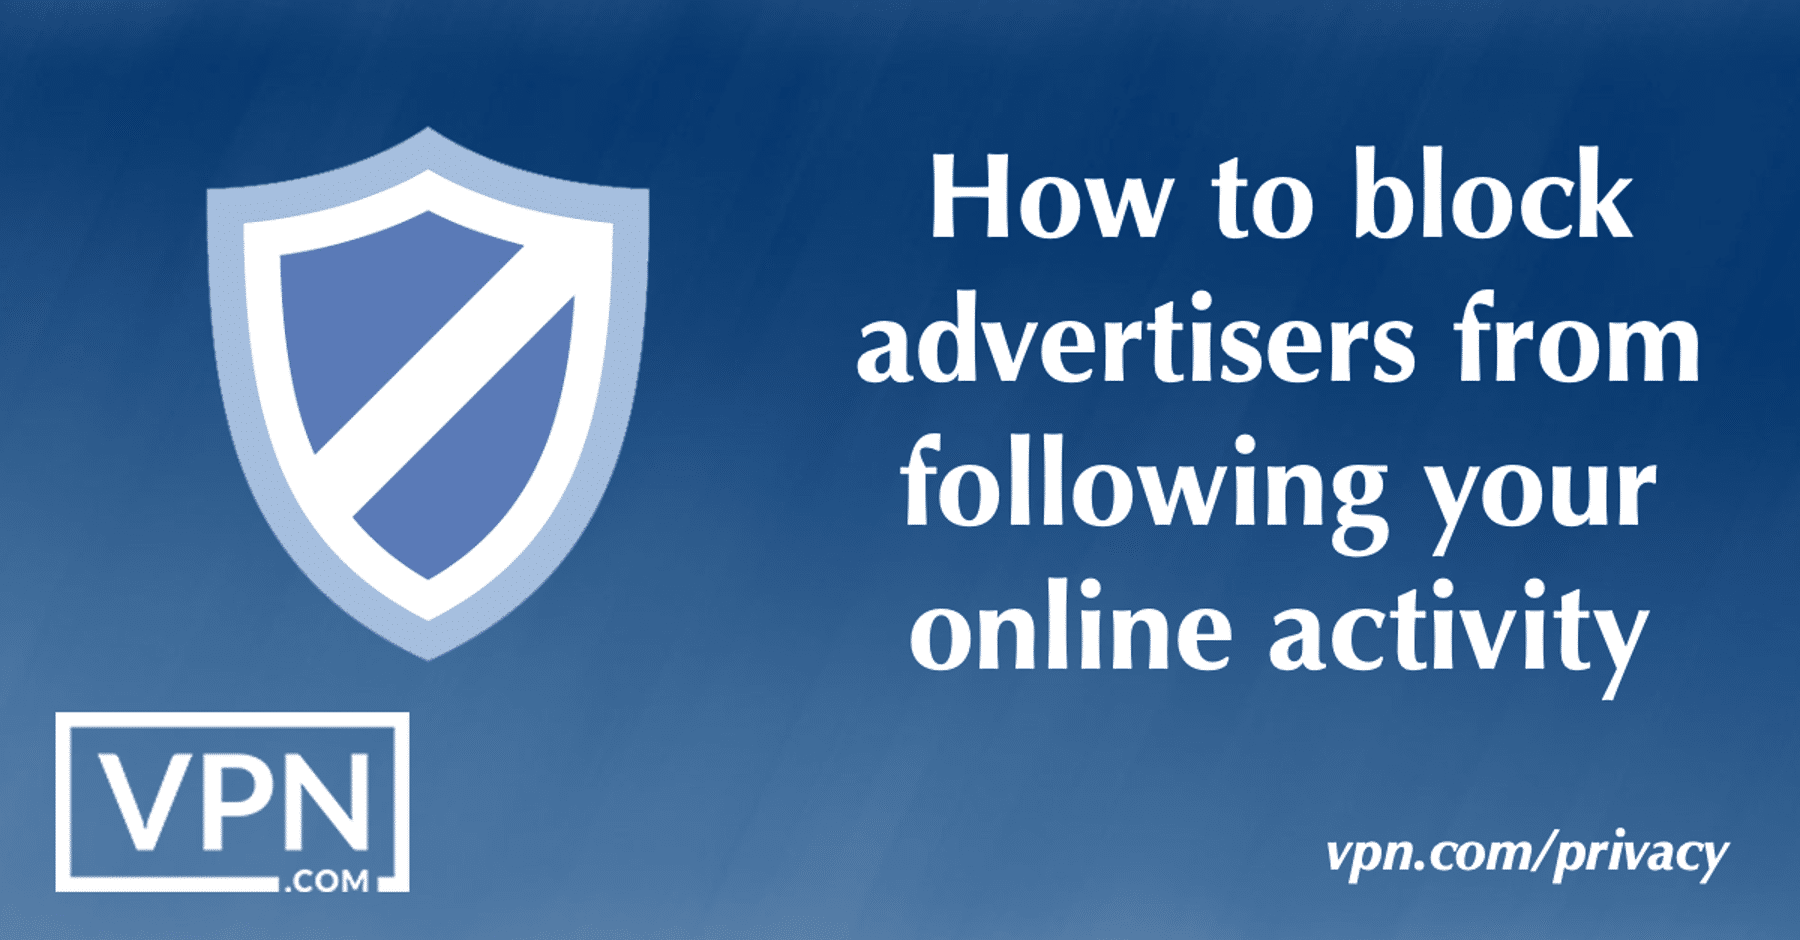 How to block advertisers from following your online activity.